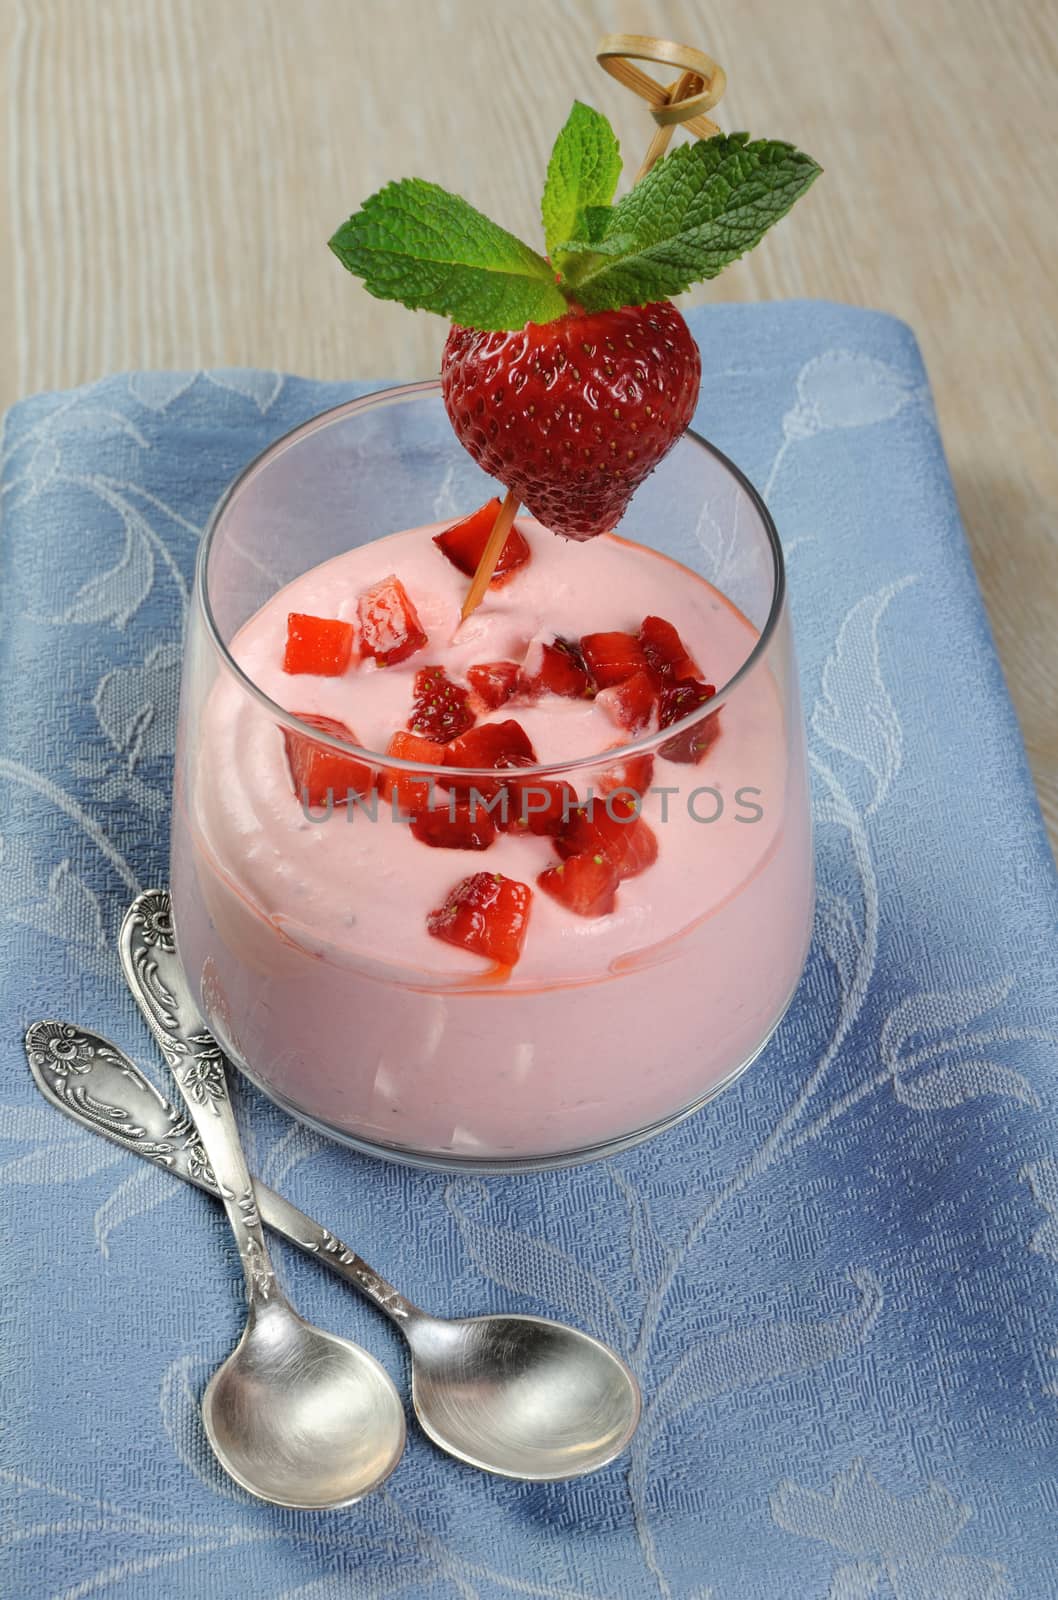 Light and delicate yogurt with slices of fresh strawberries